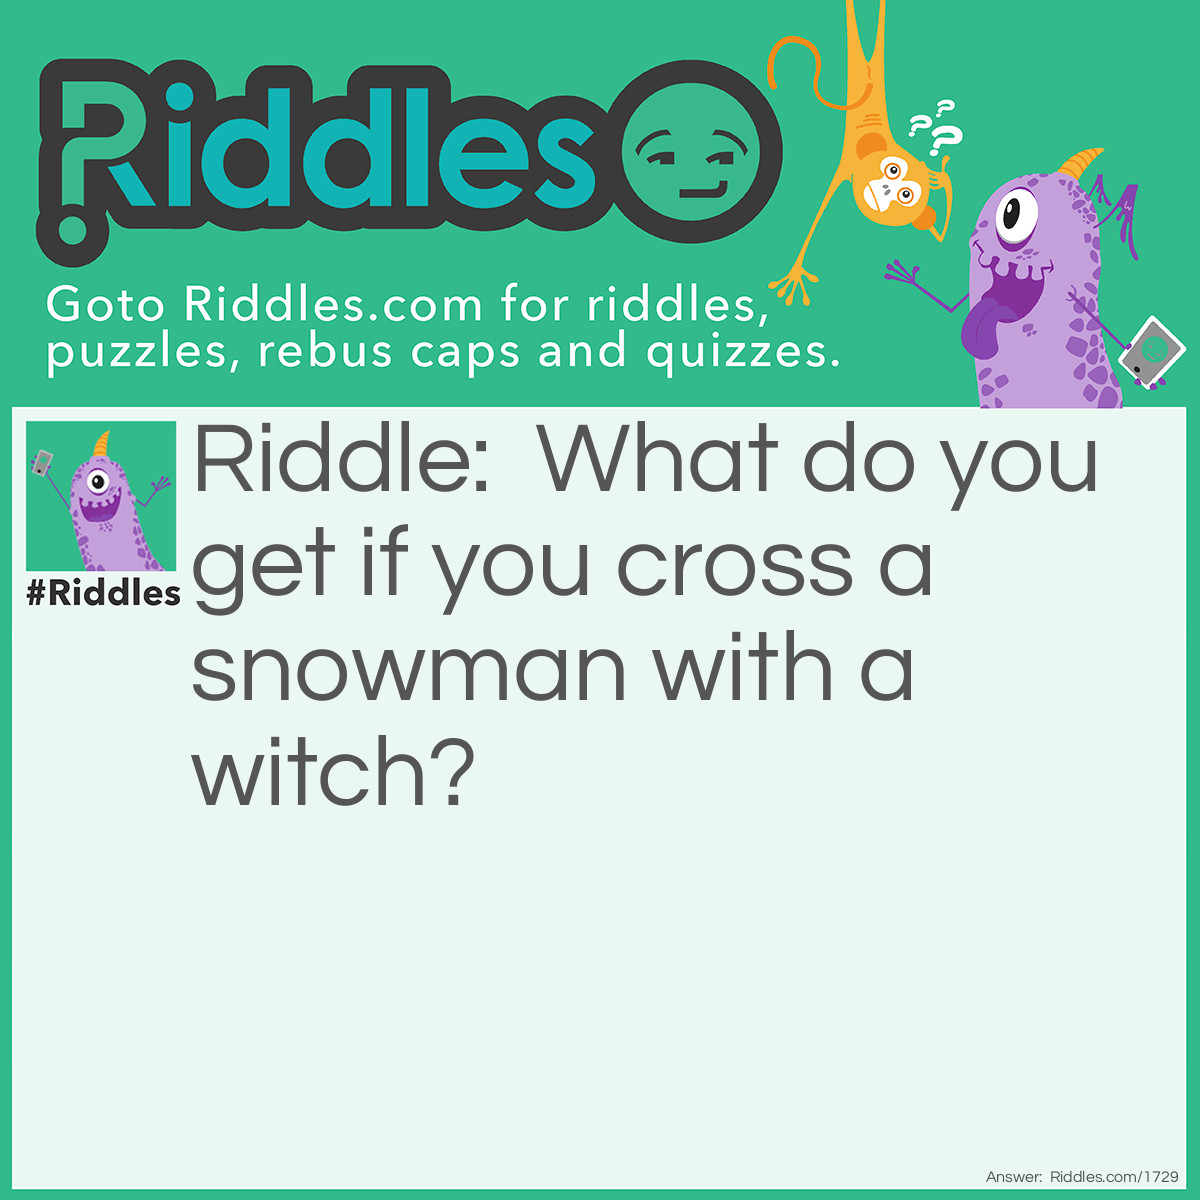 Riddle: What do you get if you cross a snowman with a witch? Answer: A cold spell.